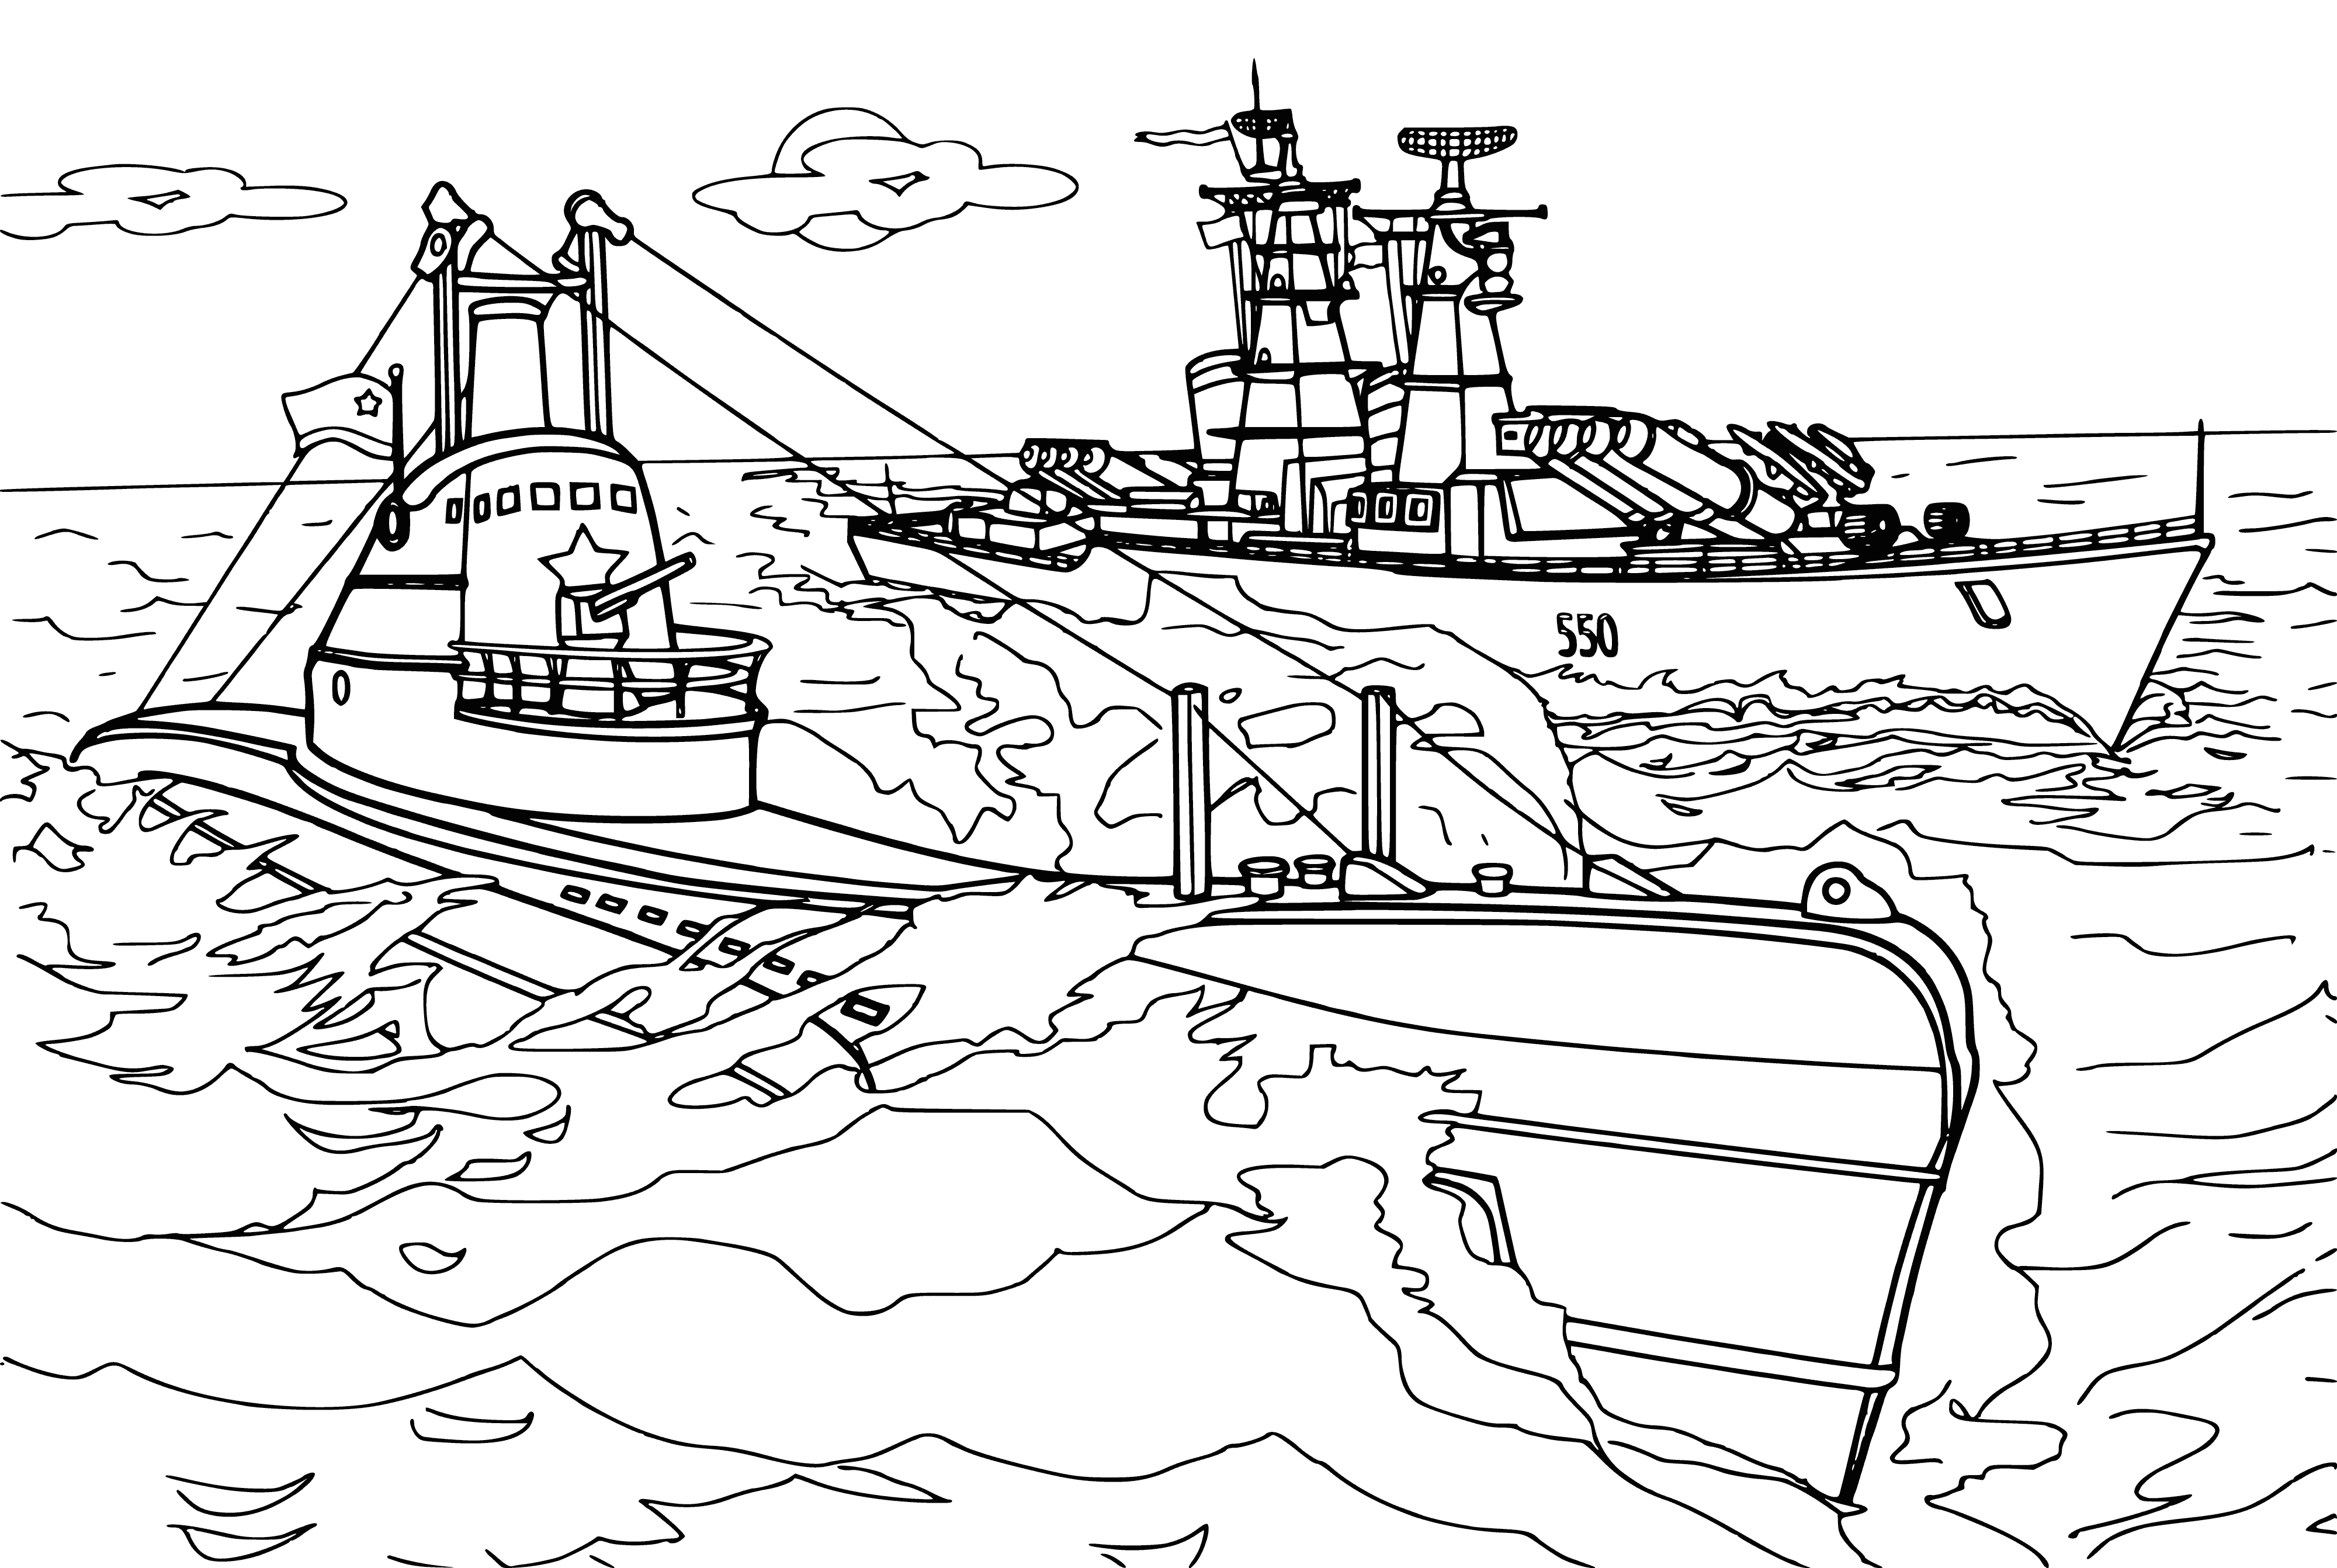 Submarine Sch-402 coloring page